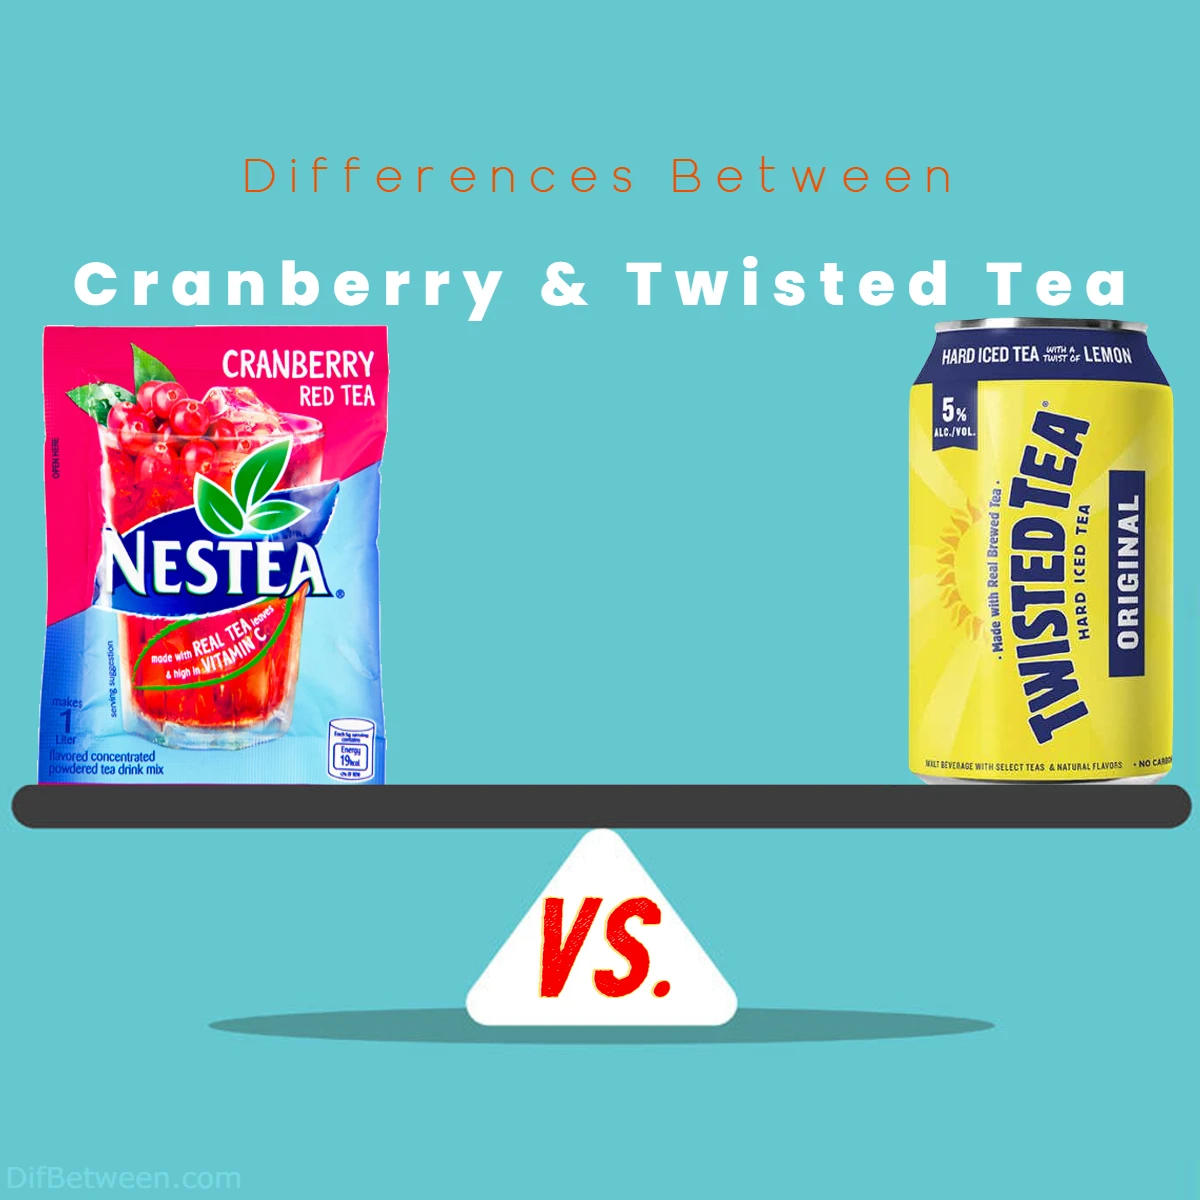 Differences Between Twisted tea vs Cranberry